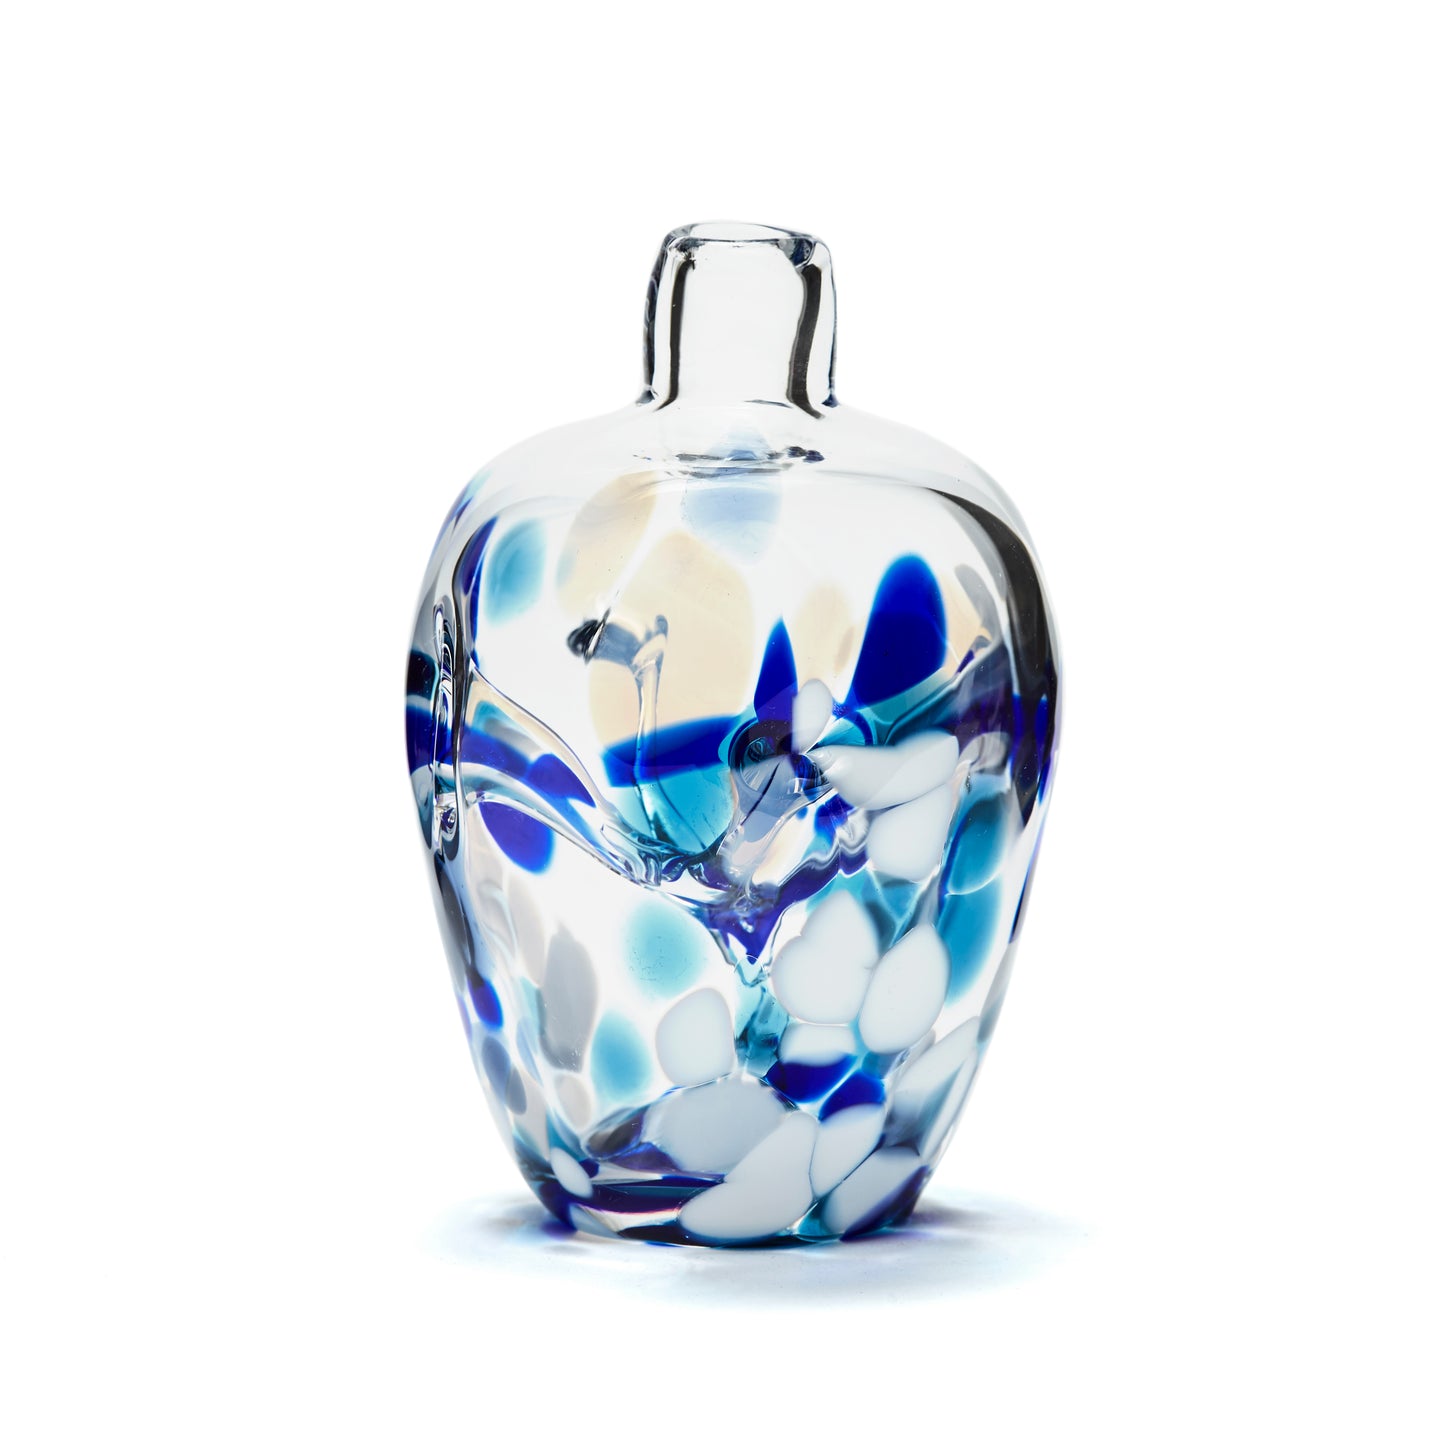 Miniature hand blown glass vase. Cobalt blue, teal blue, and white glass. Colour combination is called "Winter."